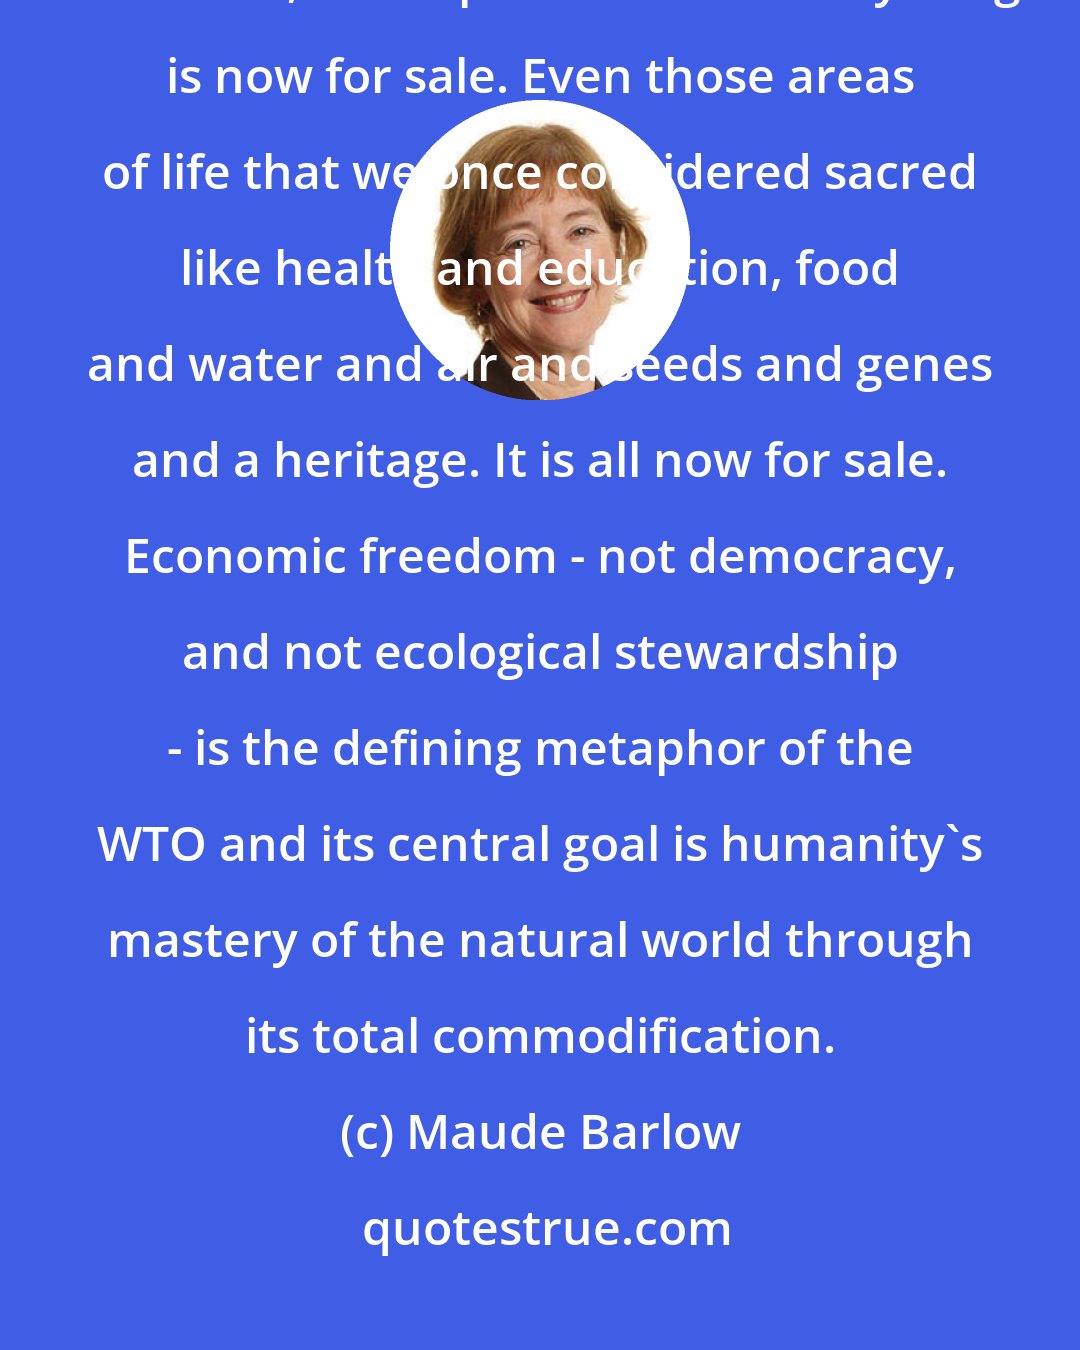 Maude Barlow: At the heart of the WTO is an assault on everything left standing in the commons, in the public realm. Everything is now for sale. Even those areas of life that we once considered sacred like health and education, food and water and air and seeds and genes and a heritage. It is all now for sale. Economic freedom - not democracy, and not ecological stewardship - is the defining metaphor of the WTO and its central goal is humanity's mastery of the natural world through its total commodification.